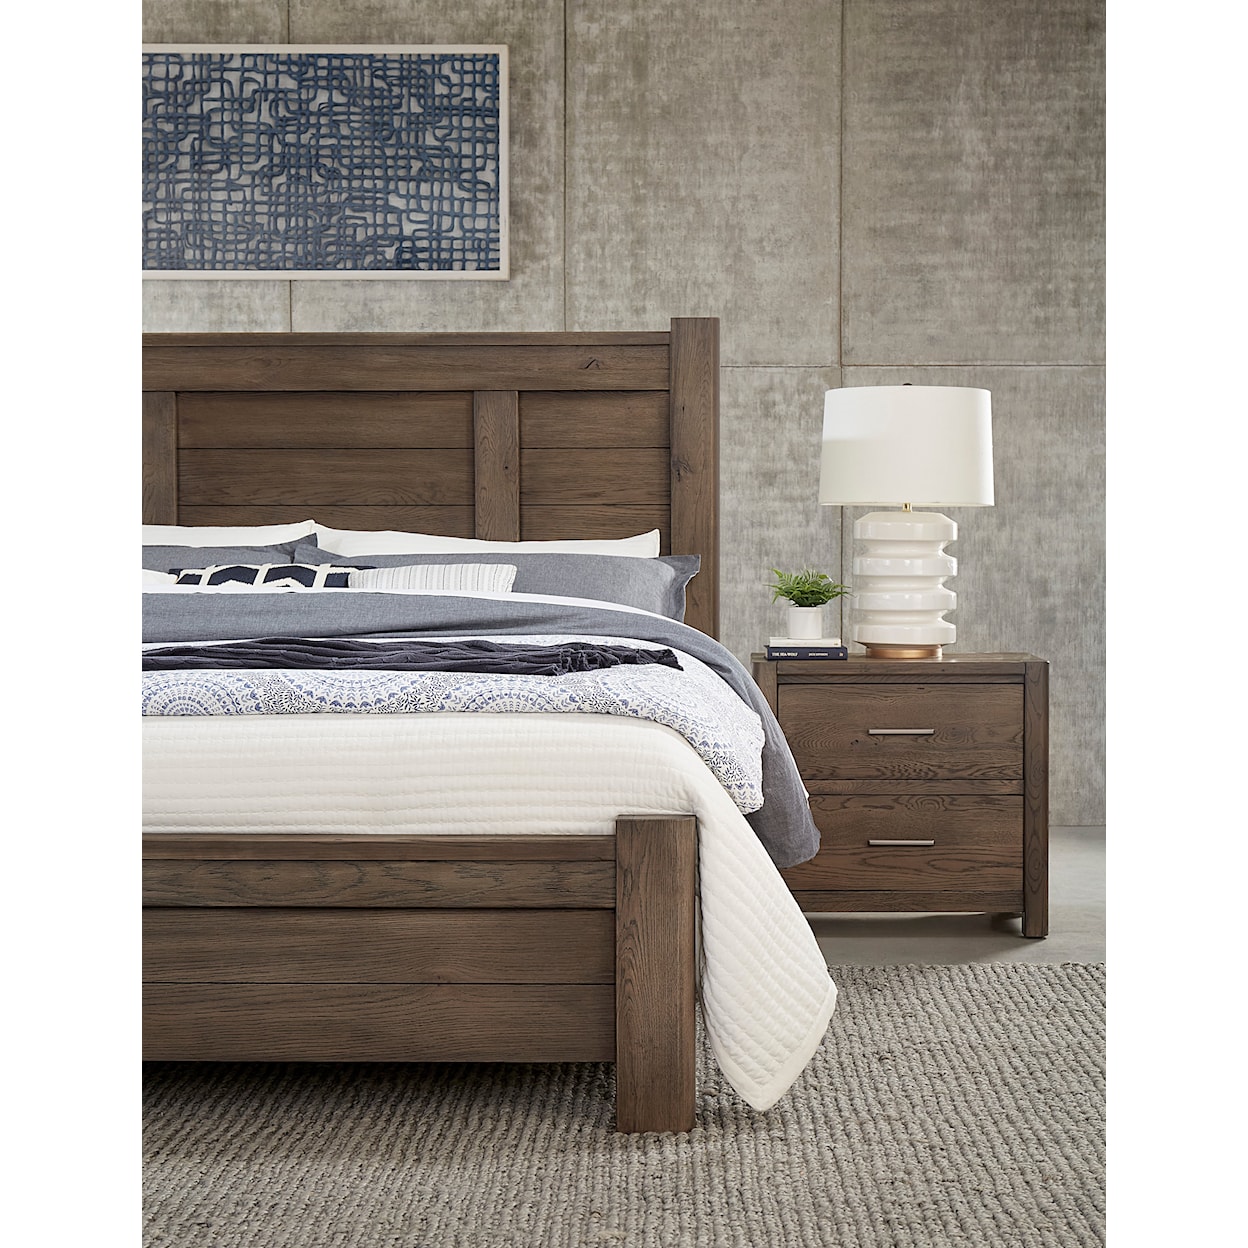 Vaughan Bassett Crafted Oak - Aged Grey Queen Poster Bed